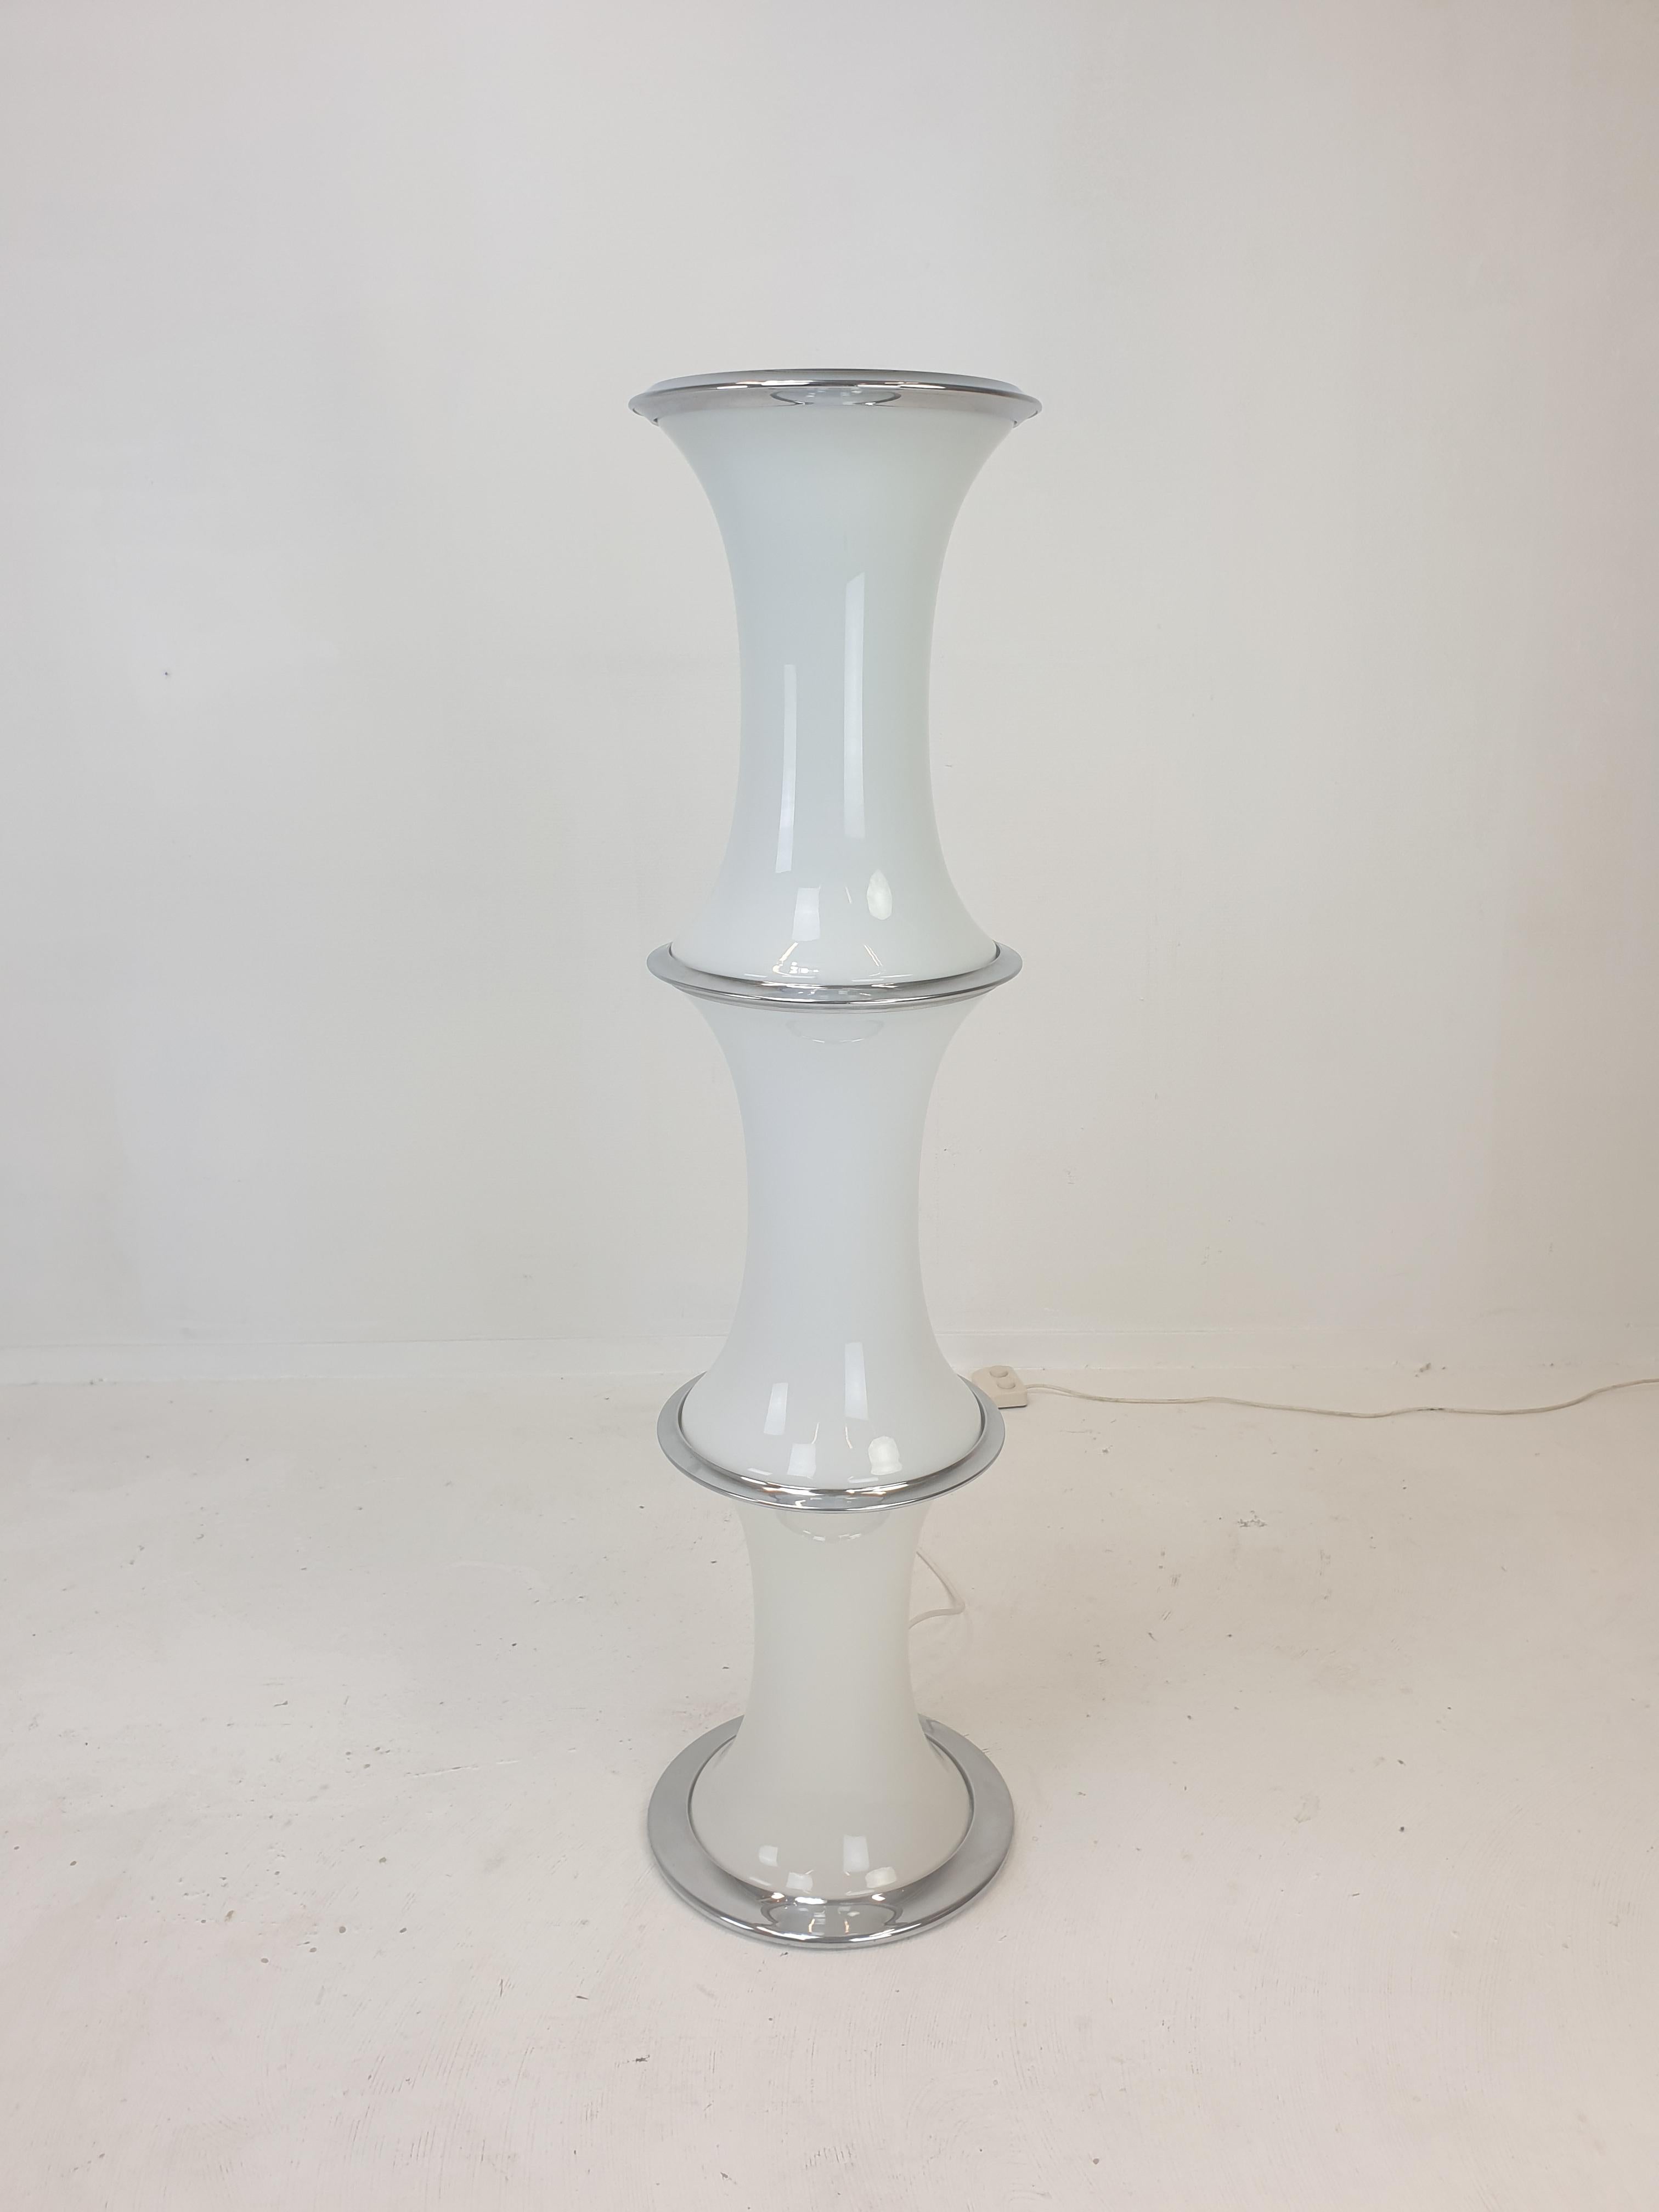 Very nice Murano glass sculptural floor lamp by Enrico Tronconi for Vistosi. 

It has 3 glass pieces and every section has 2 lamps, on the top there is a uplighter.

It is in very good original condition with very minor wear.

 It gives a